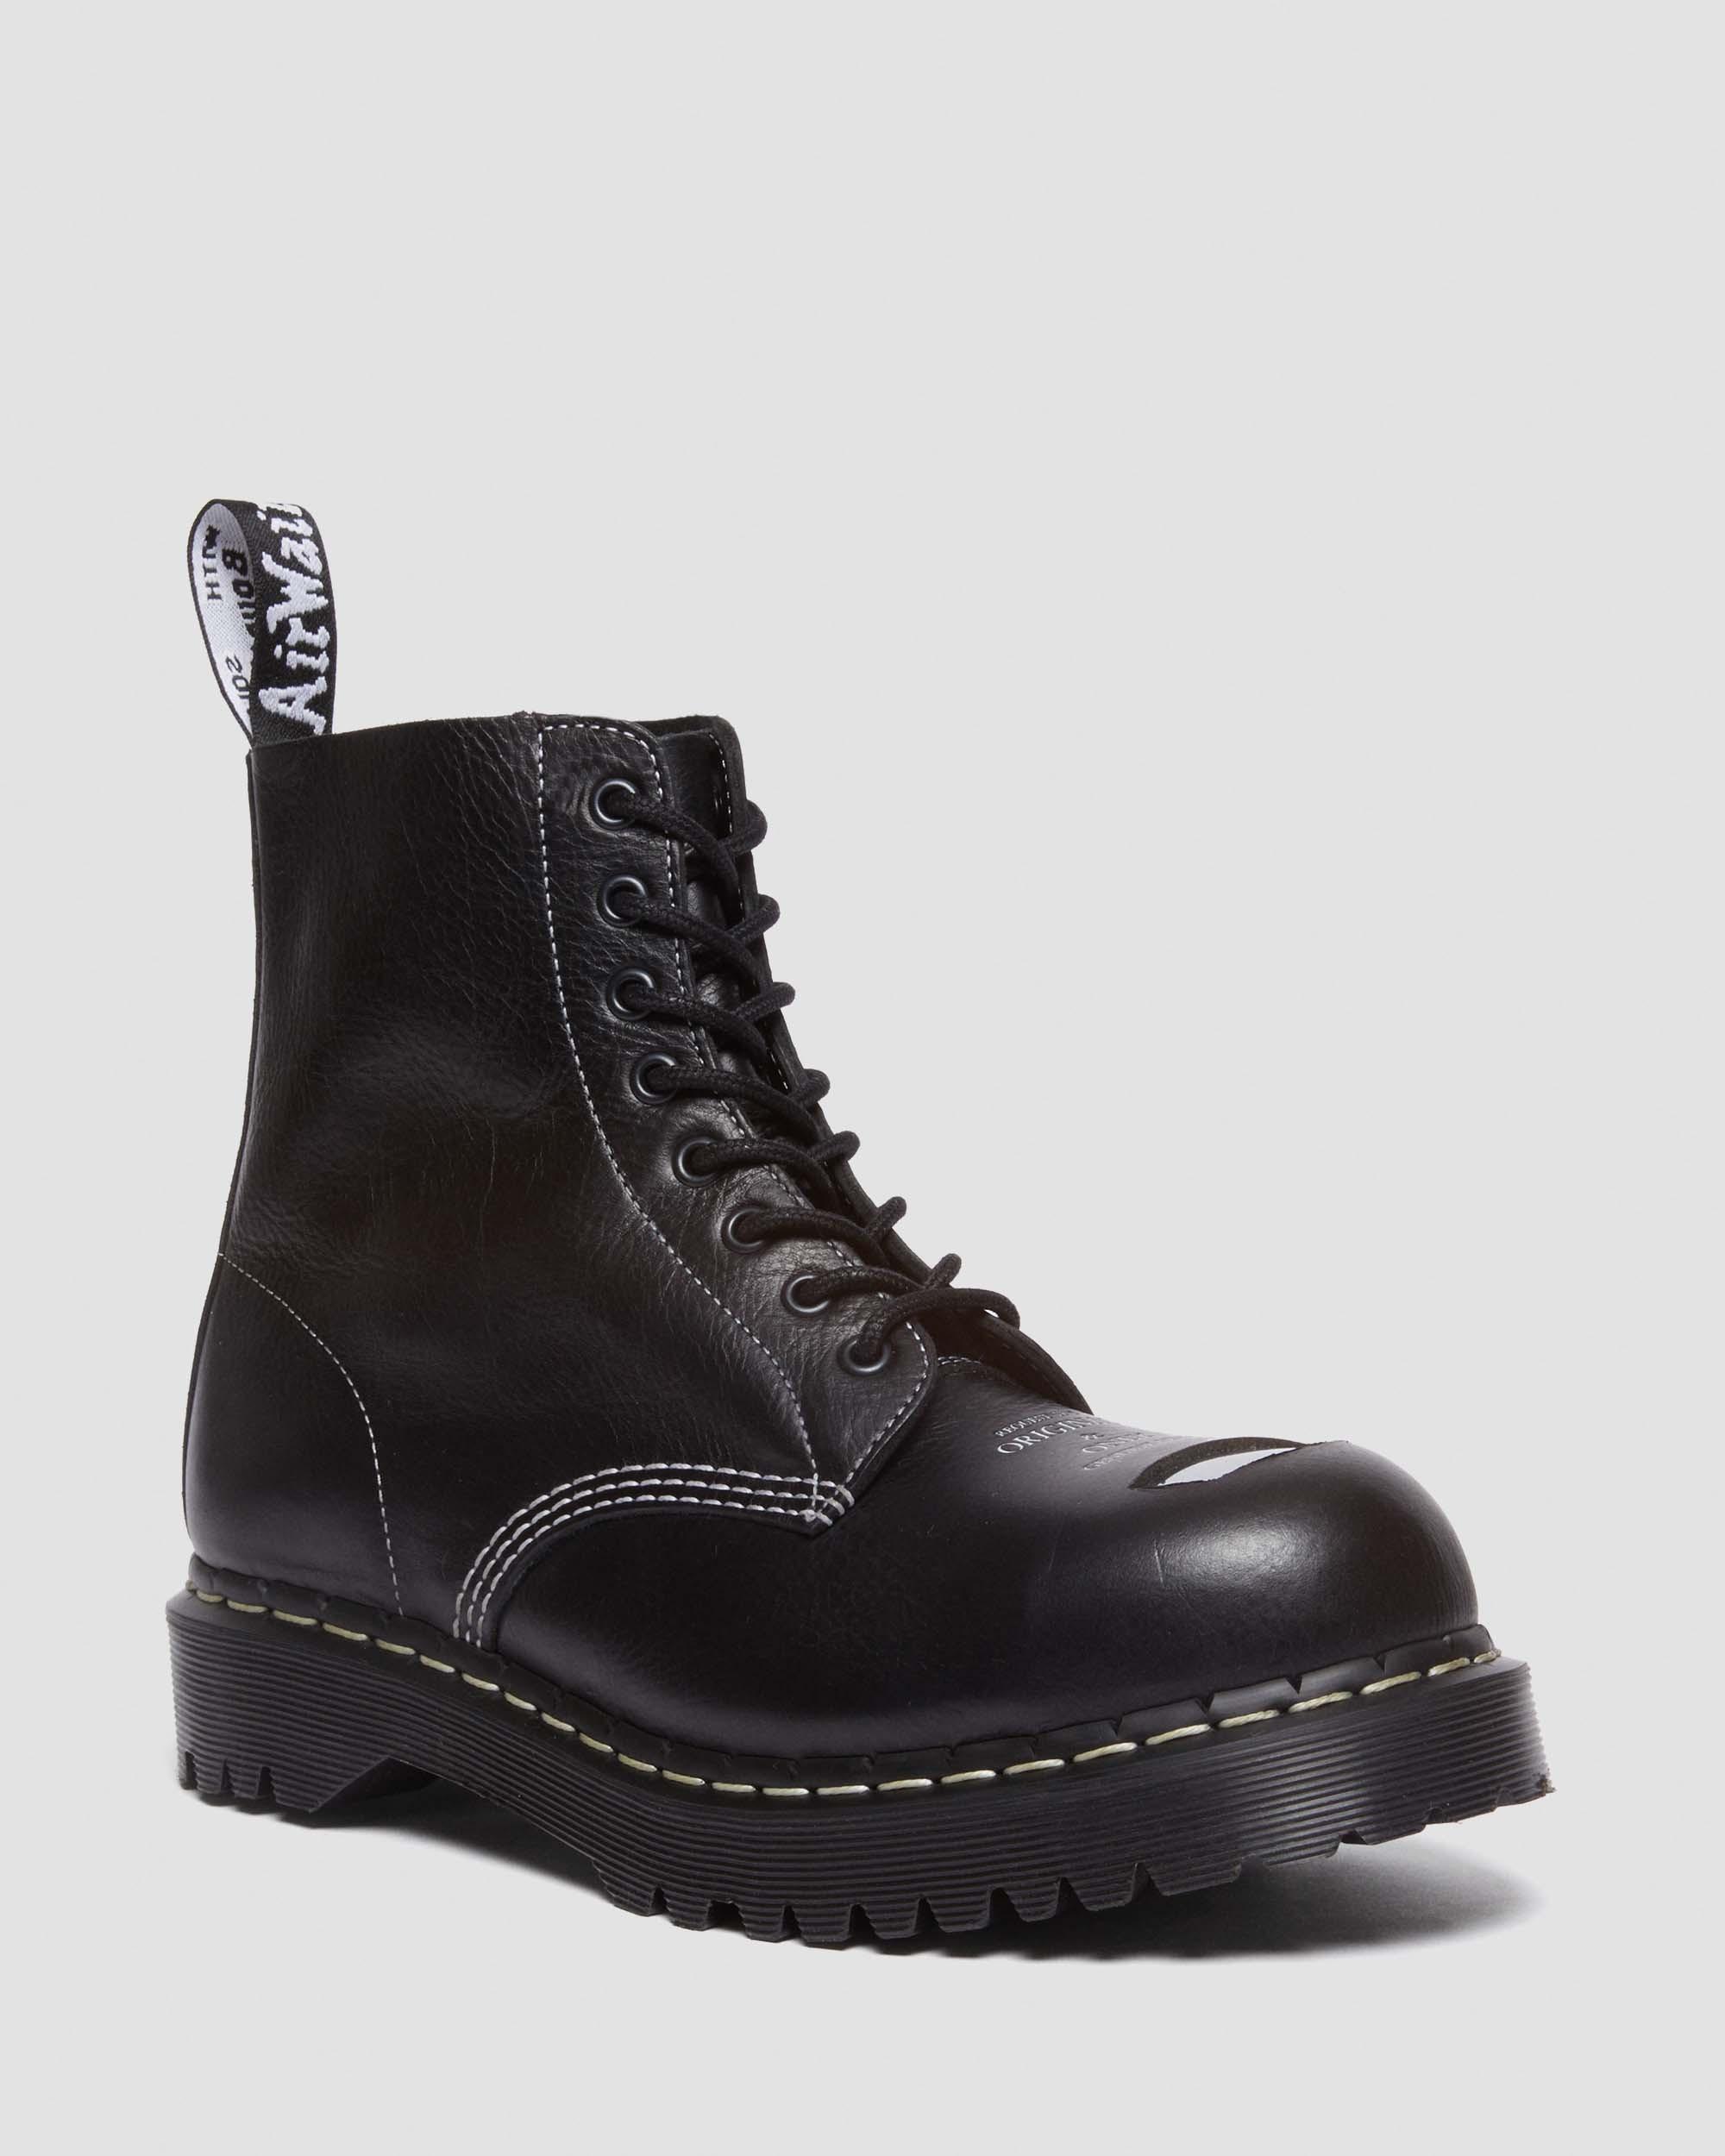 DR MARTENS 1460 Pascal Bex Exposed Steel Toe Lace Up Boots